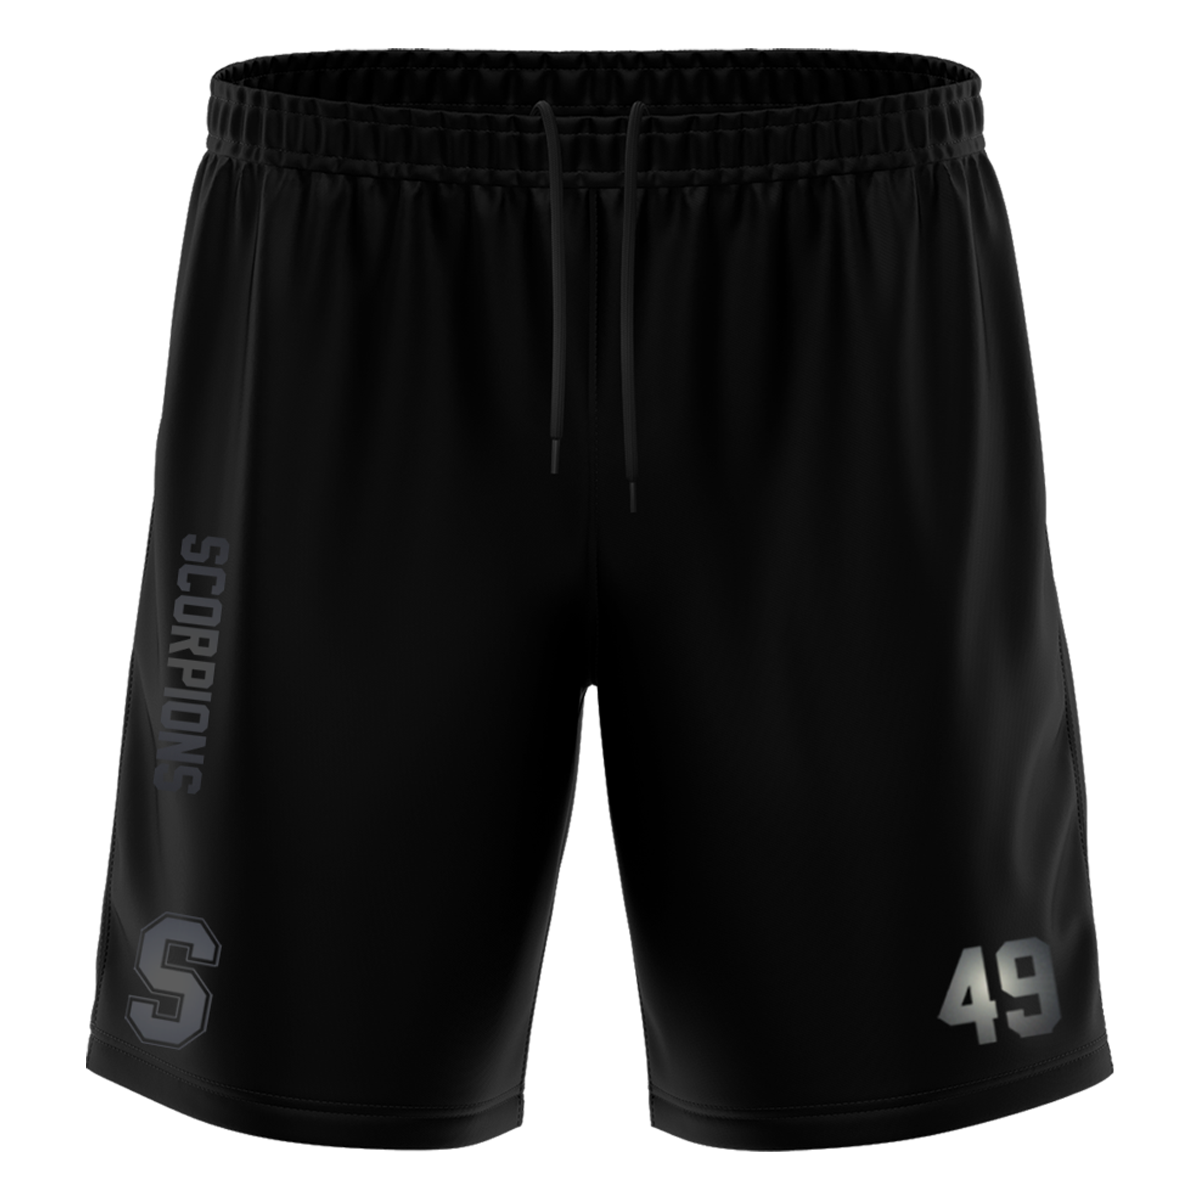 Scorpions "Blackline" Training Short with Playernumber or Initials